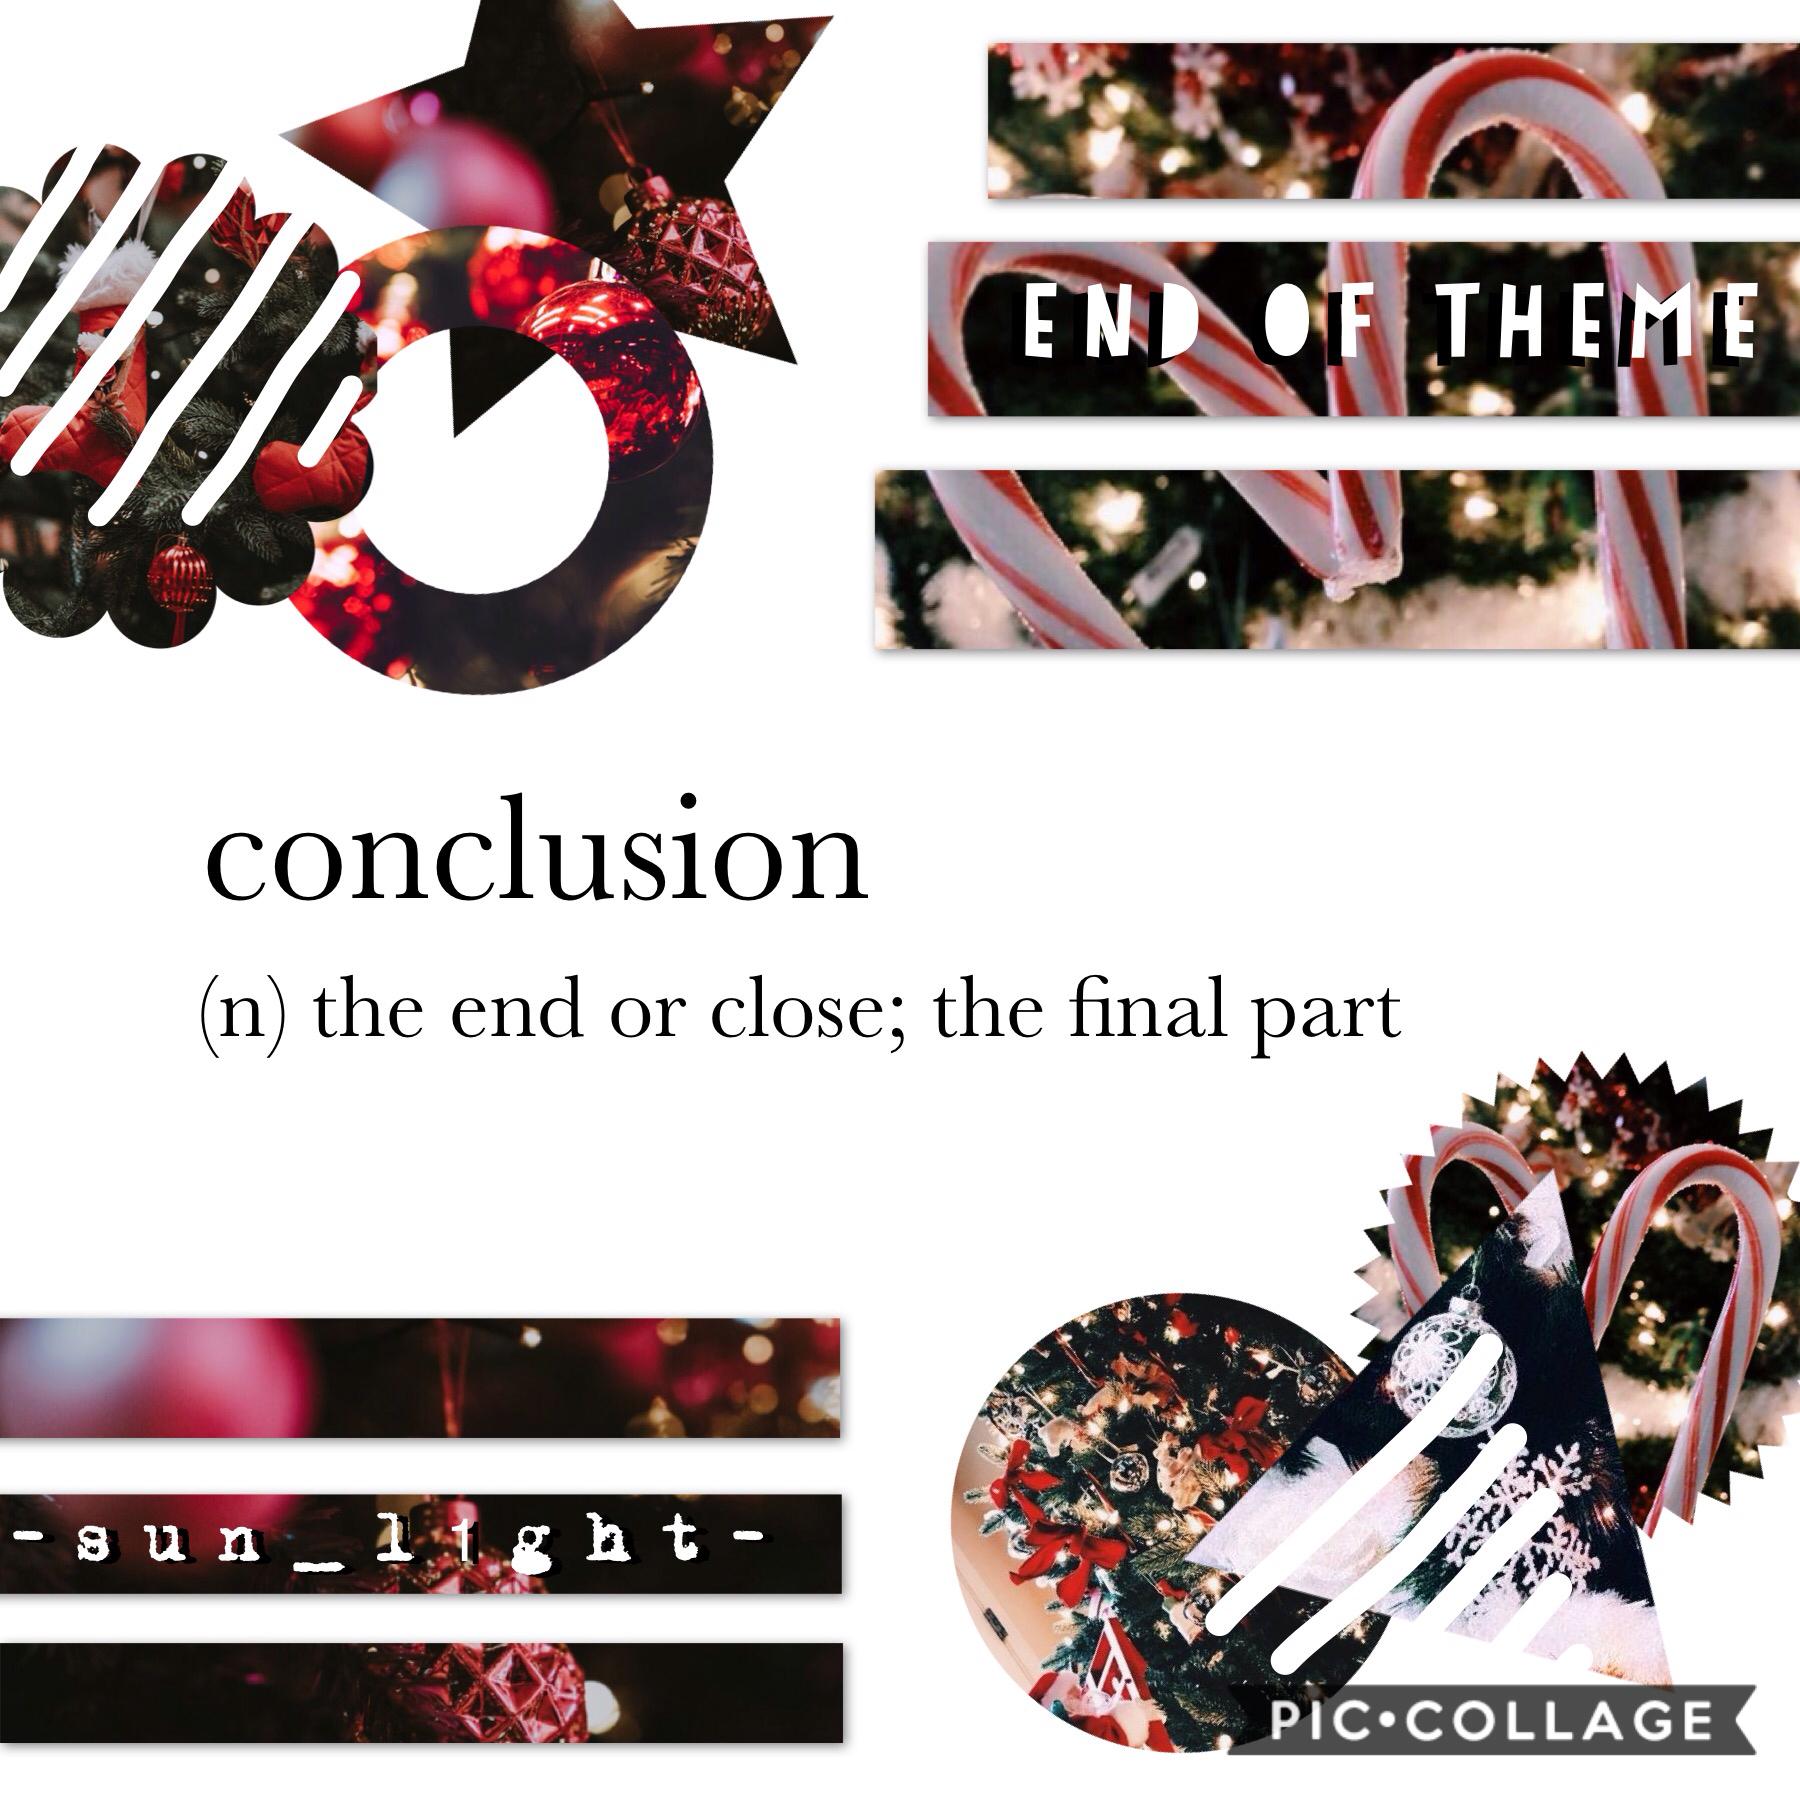 hit the star --> ⭐️
I'm sad to say, it's the end of this theme! I wanted to end off festive as Christmas draws closer,
which leads to the Christmas countdown and lots of new festive collages coming up soon! talk later! ✨🎄 20/12/19 💞 m e l